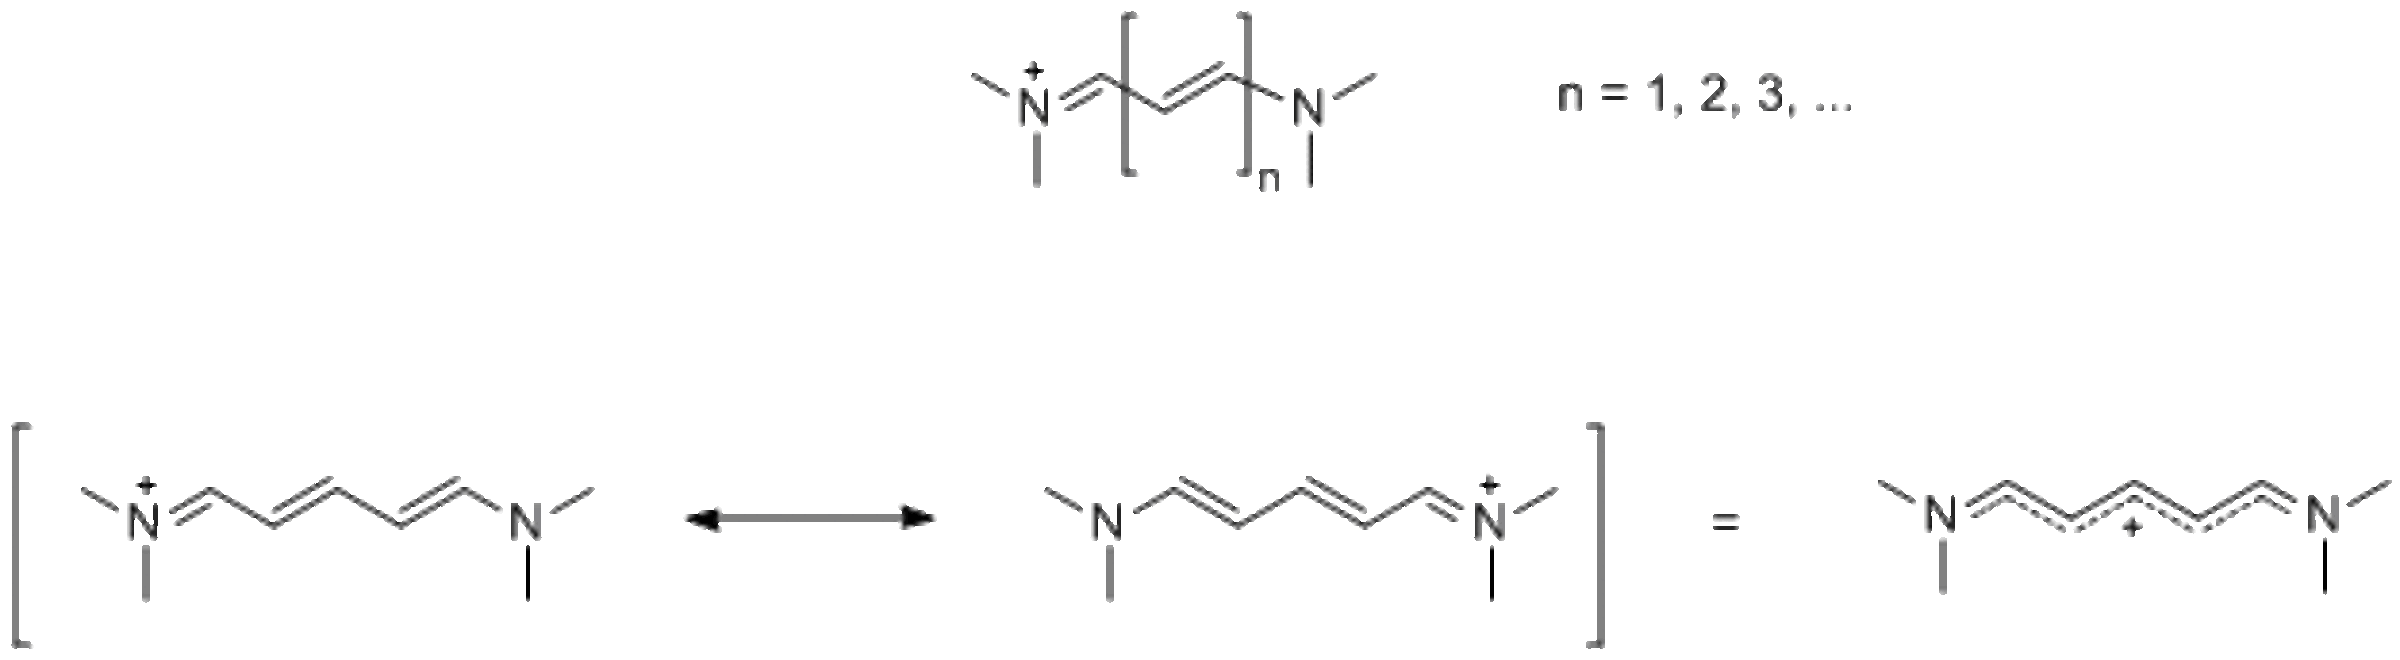 Generic structure of cyanine dyes